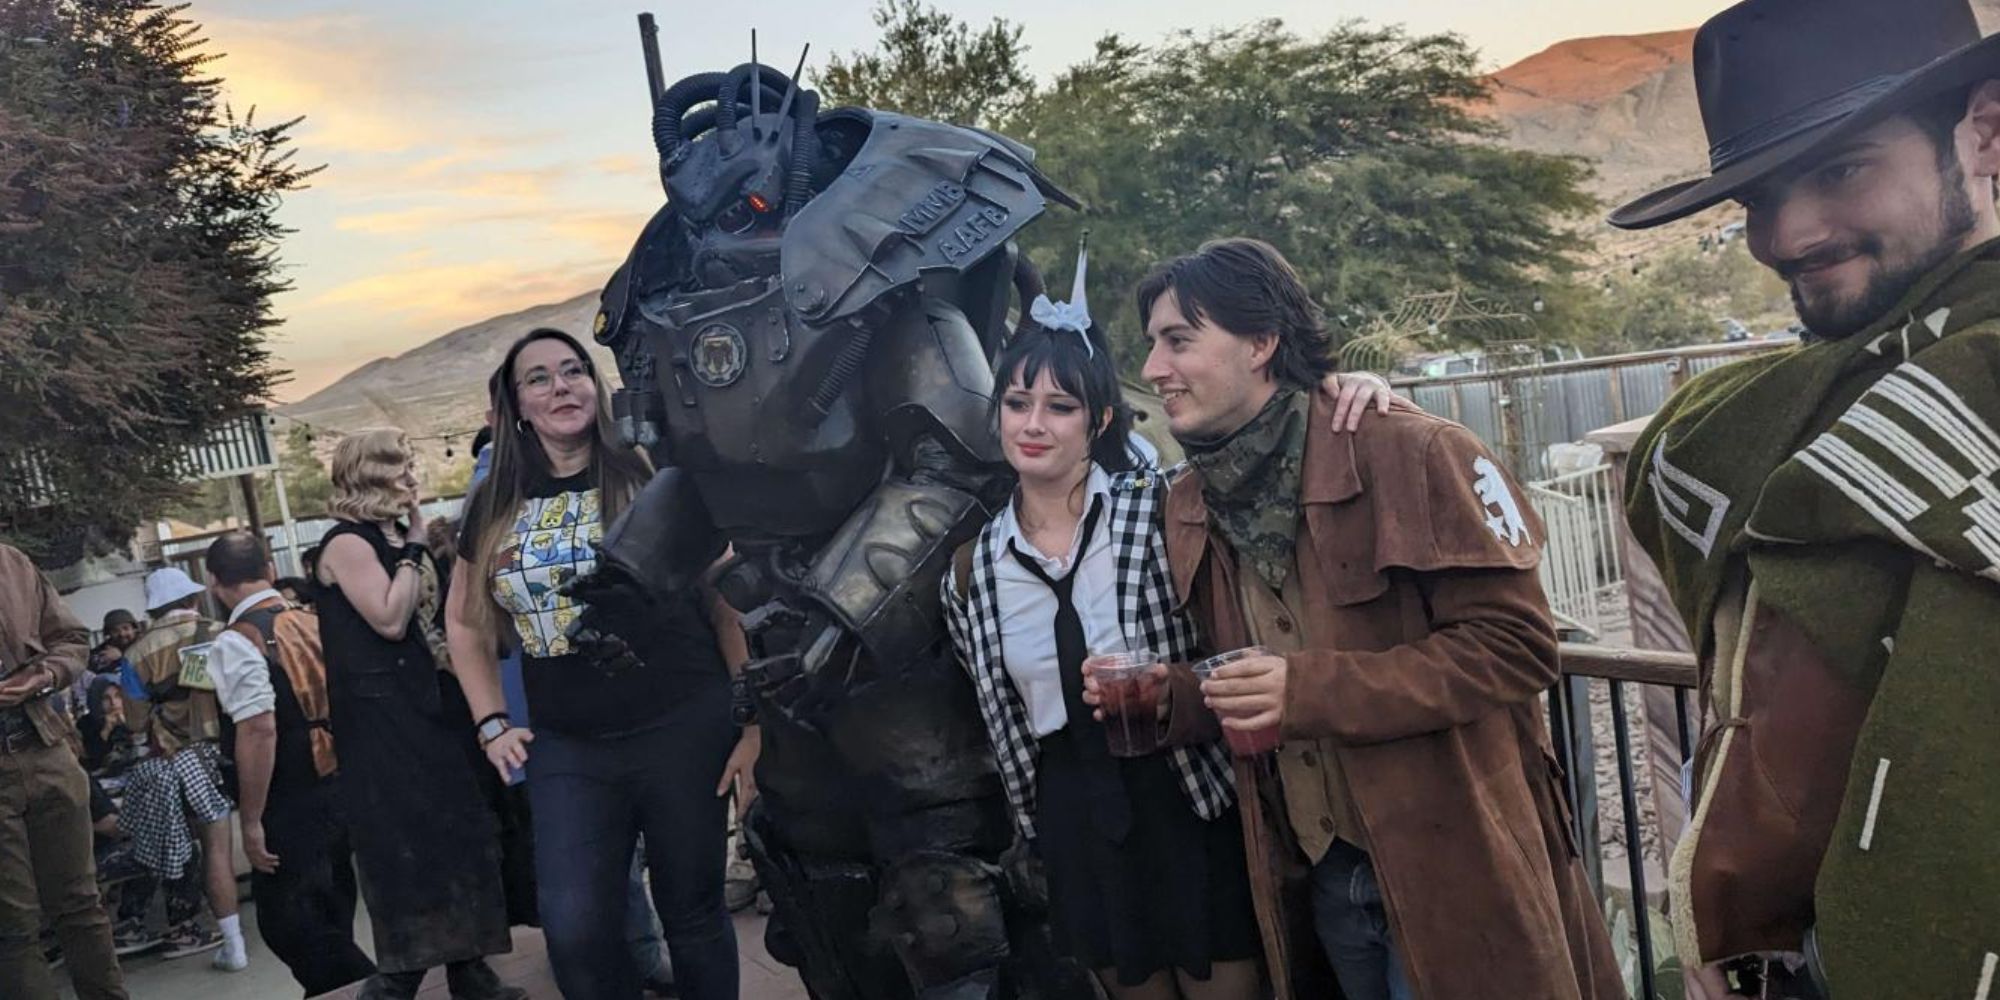 Fans of the game Fallout: New Vegas meet up in Goodsprings, Nevada. One fan can be seen in huge power armour